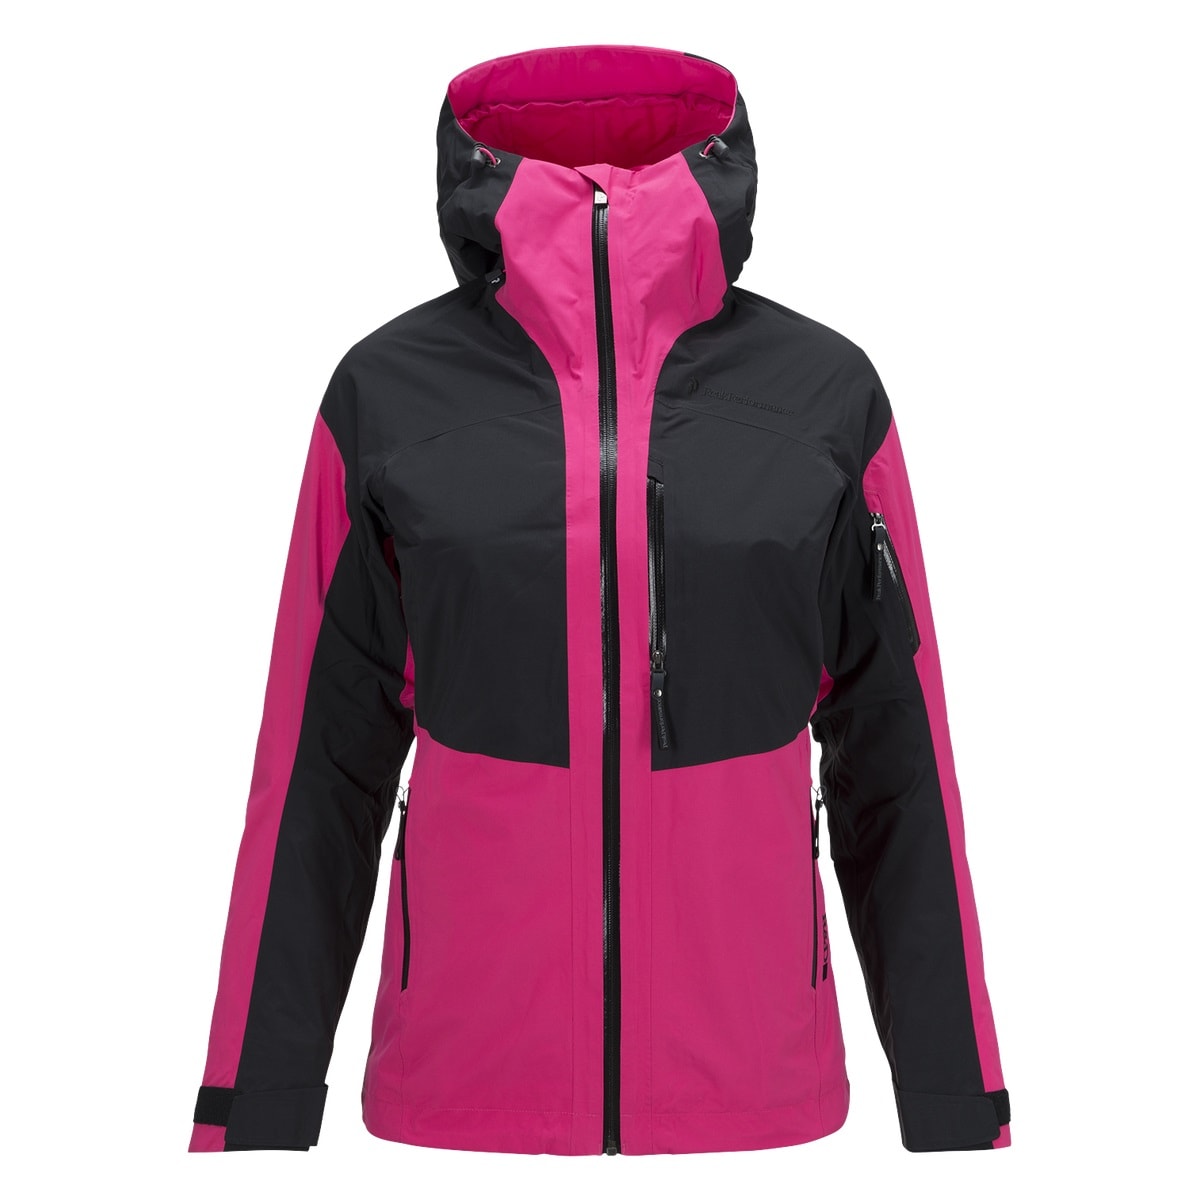 Peak Performance Women's Heli 2-layer Jacket from Outnorth